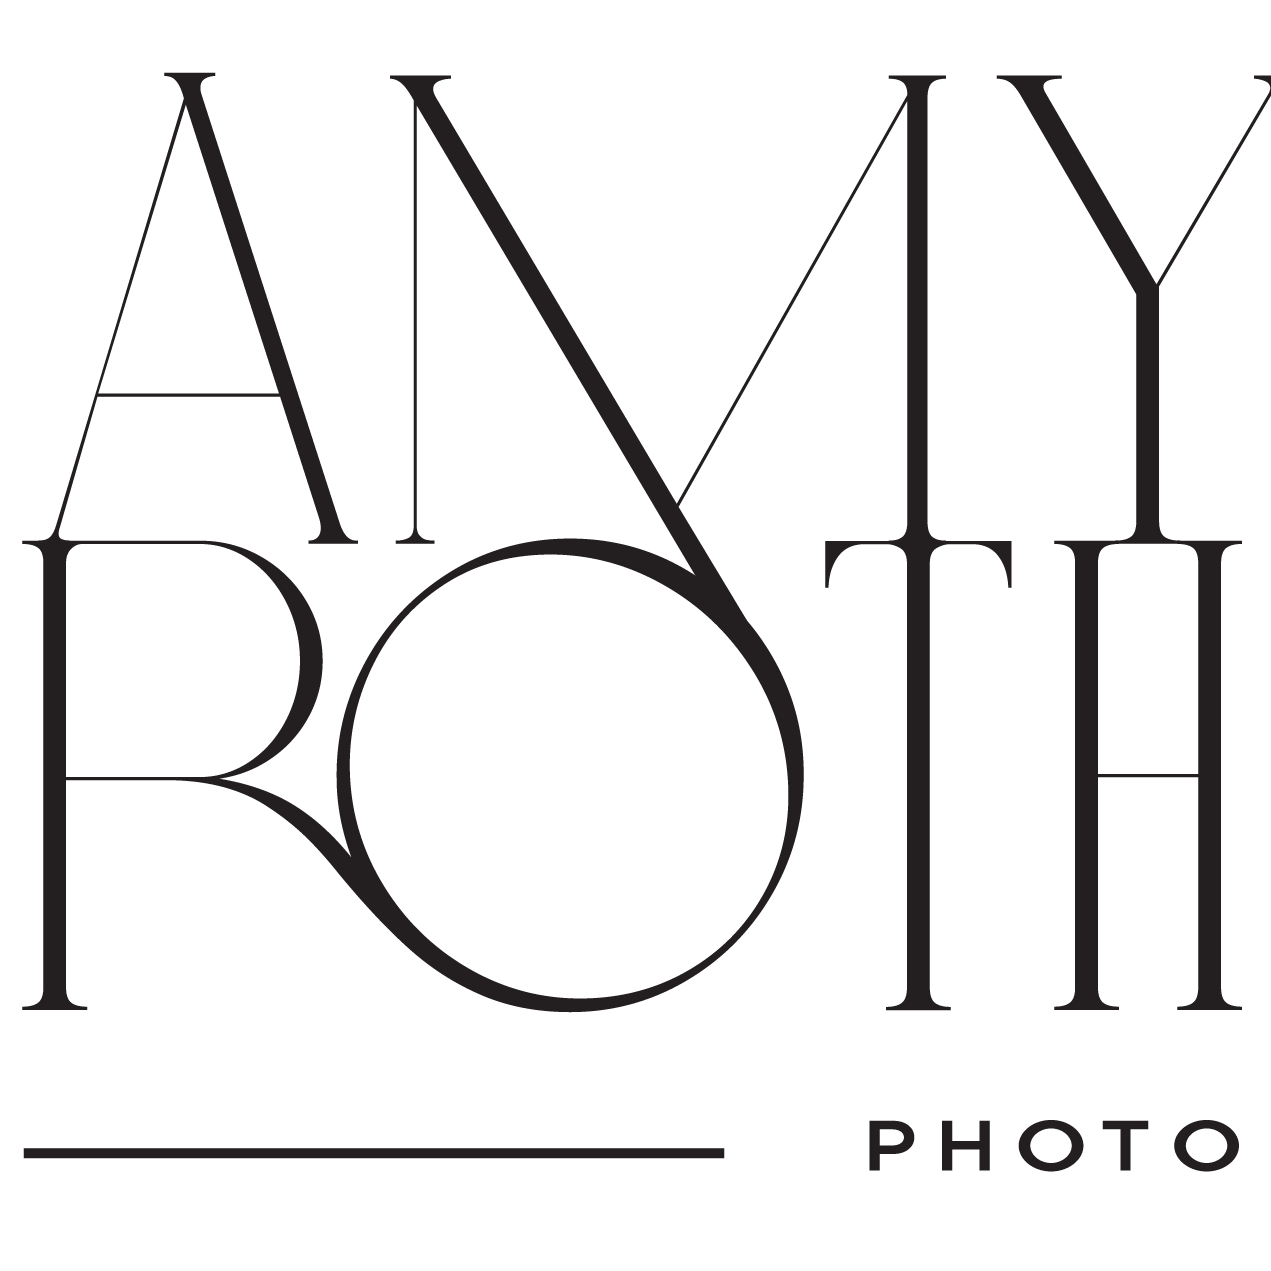 Artwork for Amy Roth Photo’s Substack